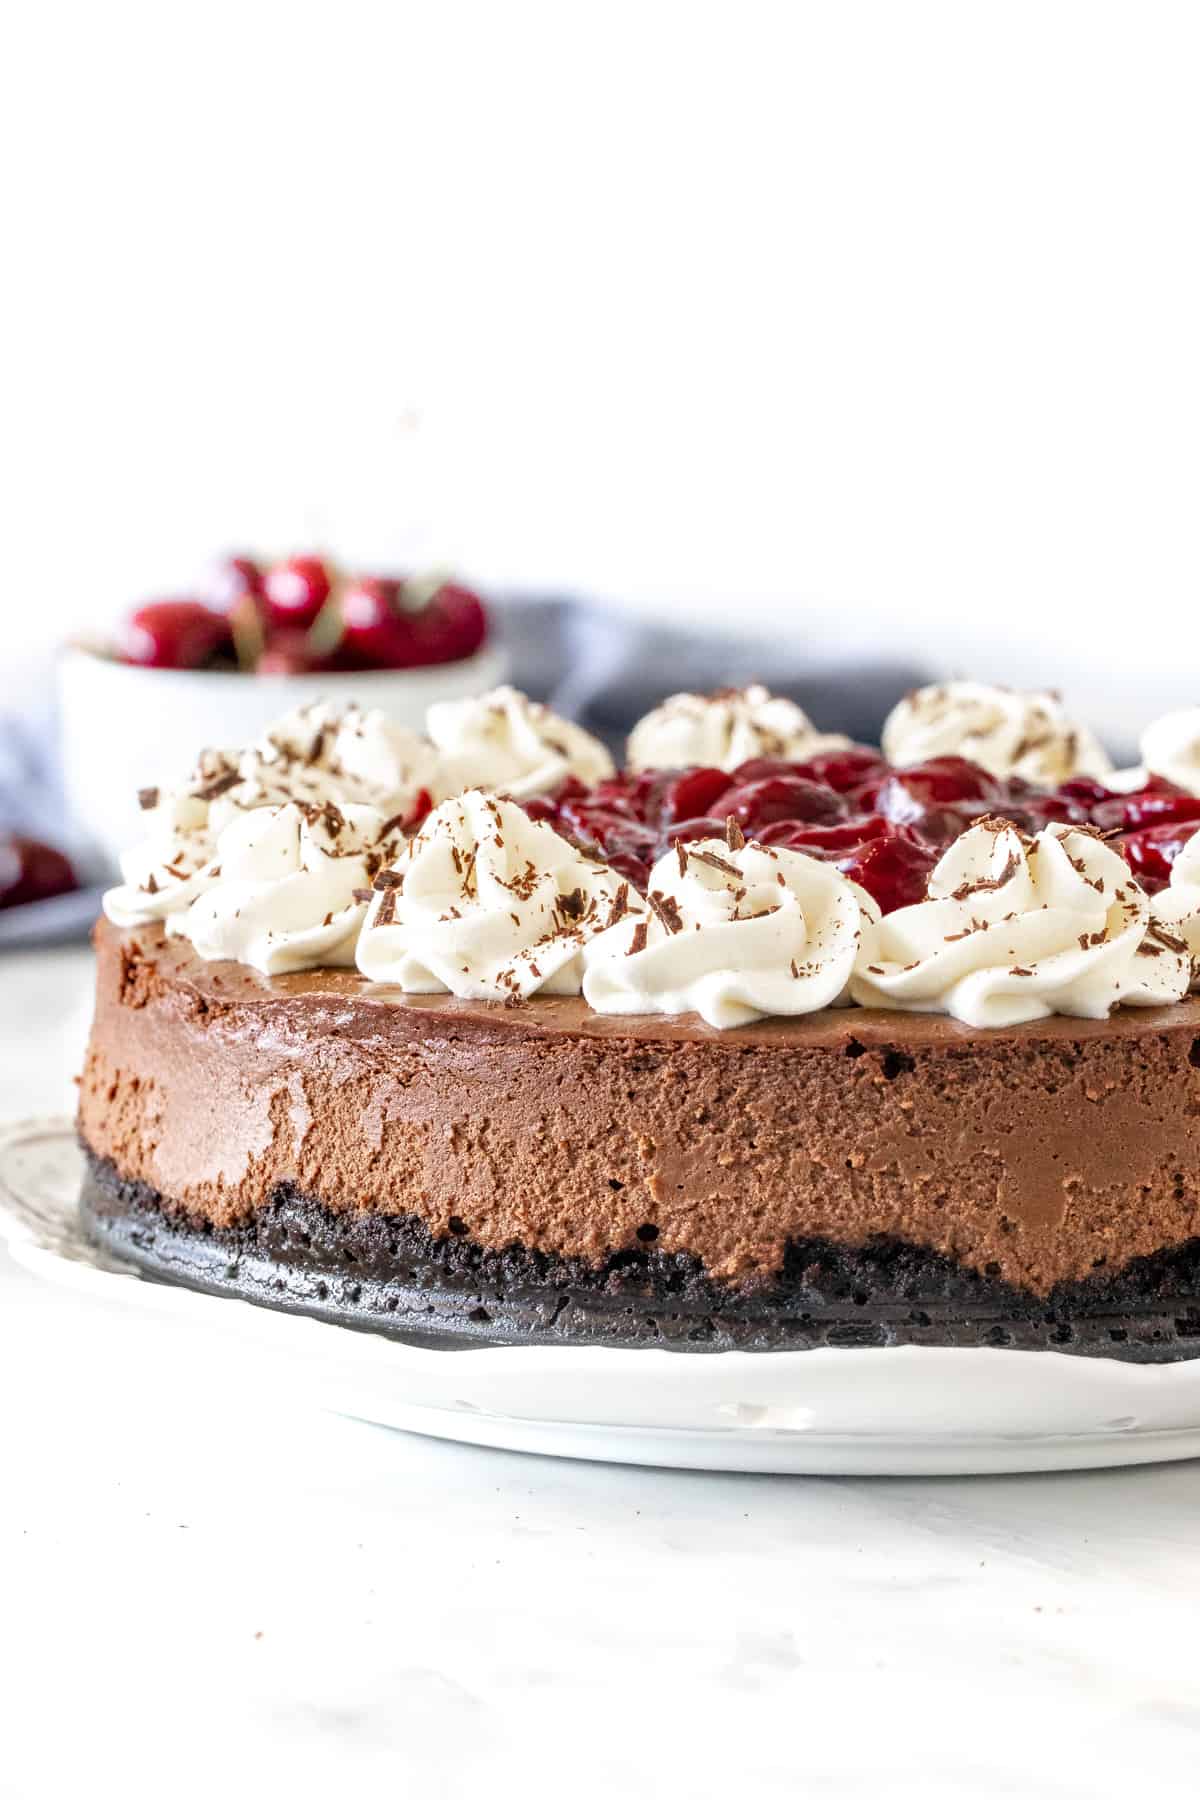 Black forest cheesecake with whipped cream and cherries on top